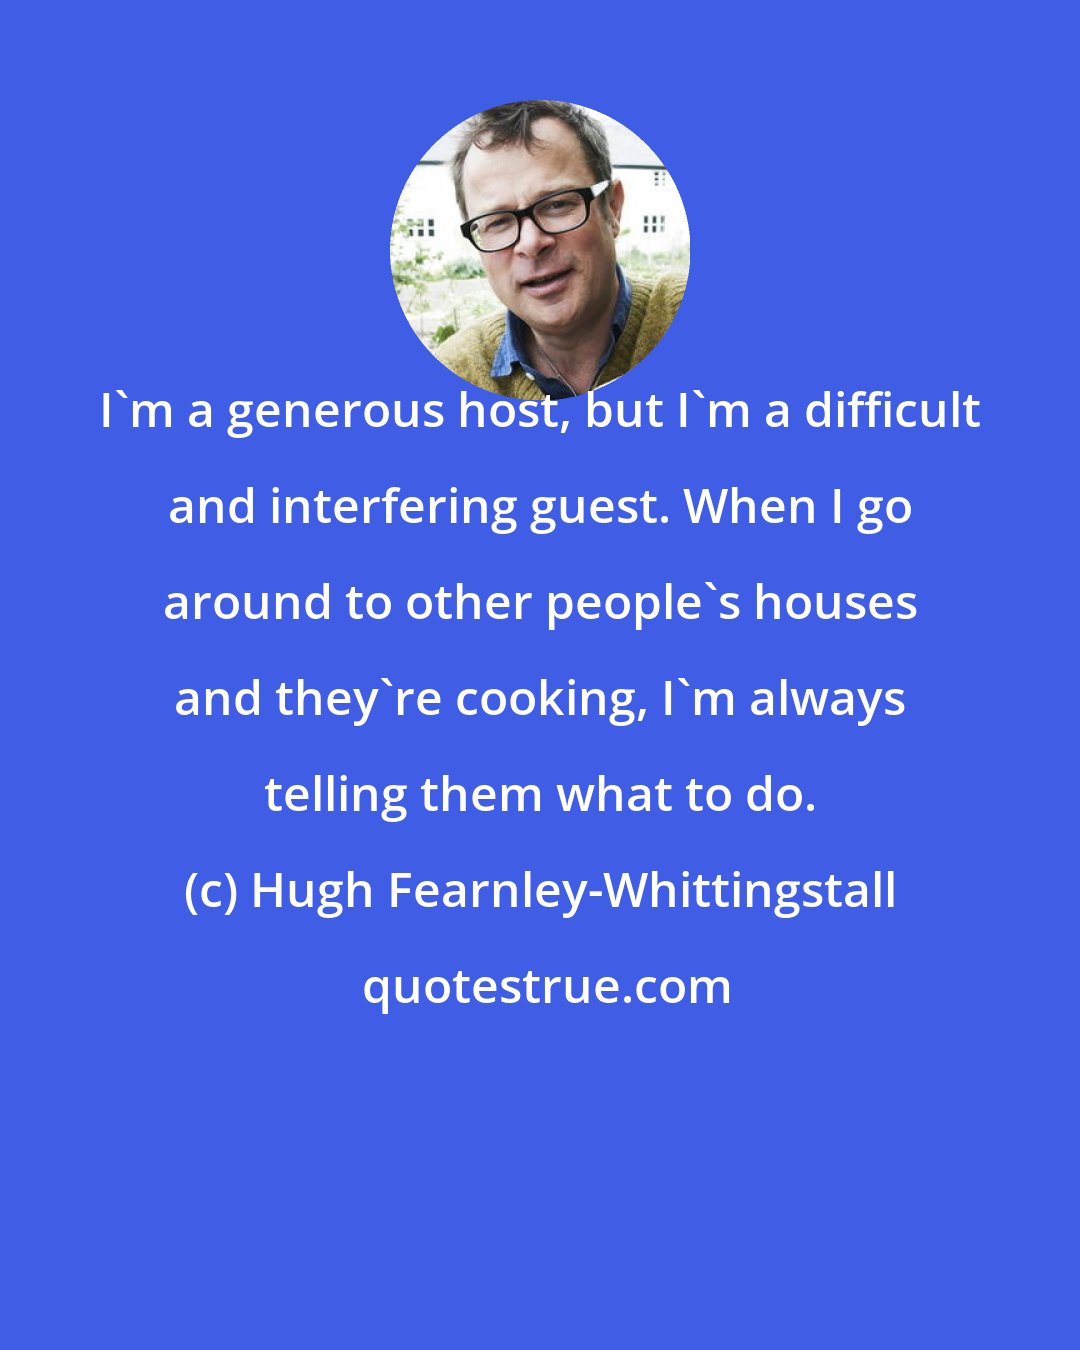 Hugh Fearnley-Whittingstall: I'm a generous host, but I'm a difficult and interfering guest. When I go around to other people's houses and they're cooking, I'm always telling them what to do.